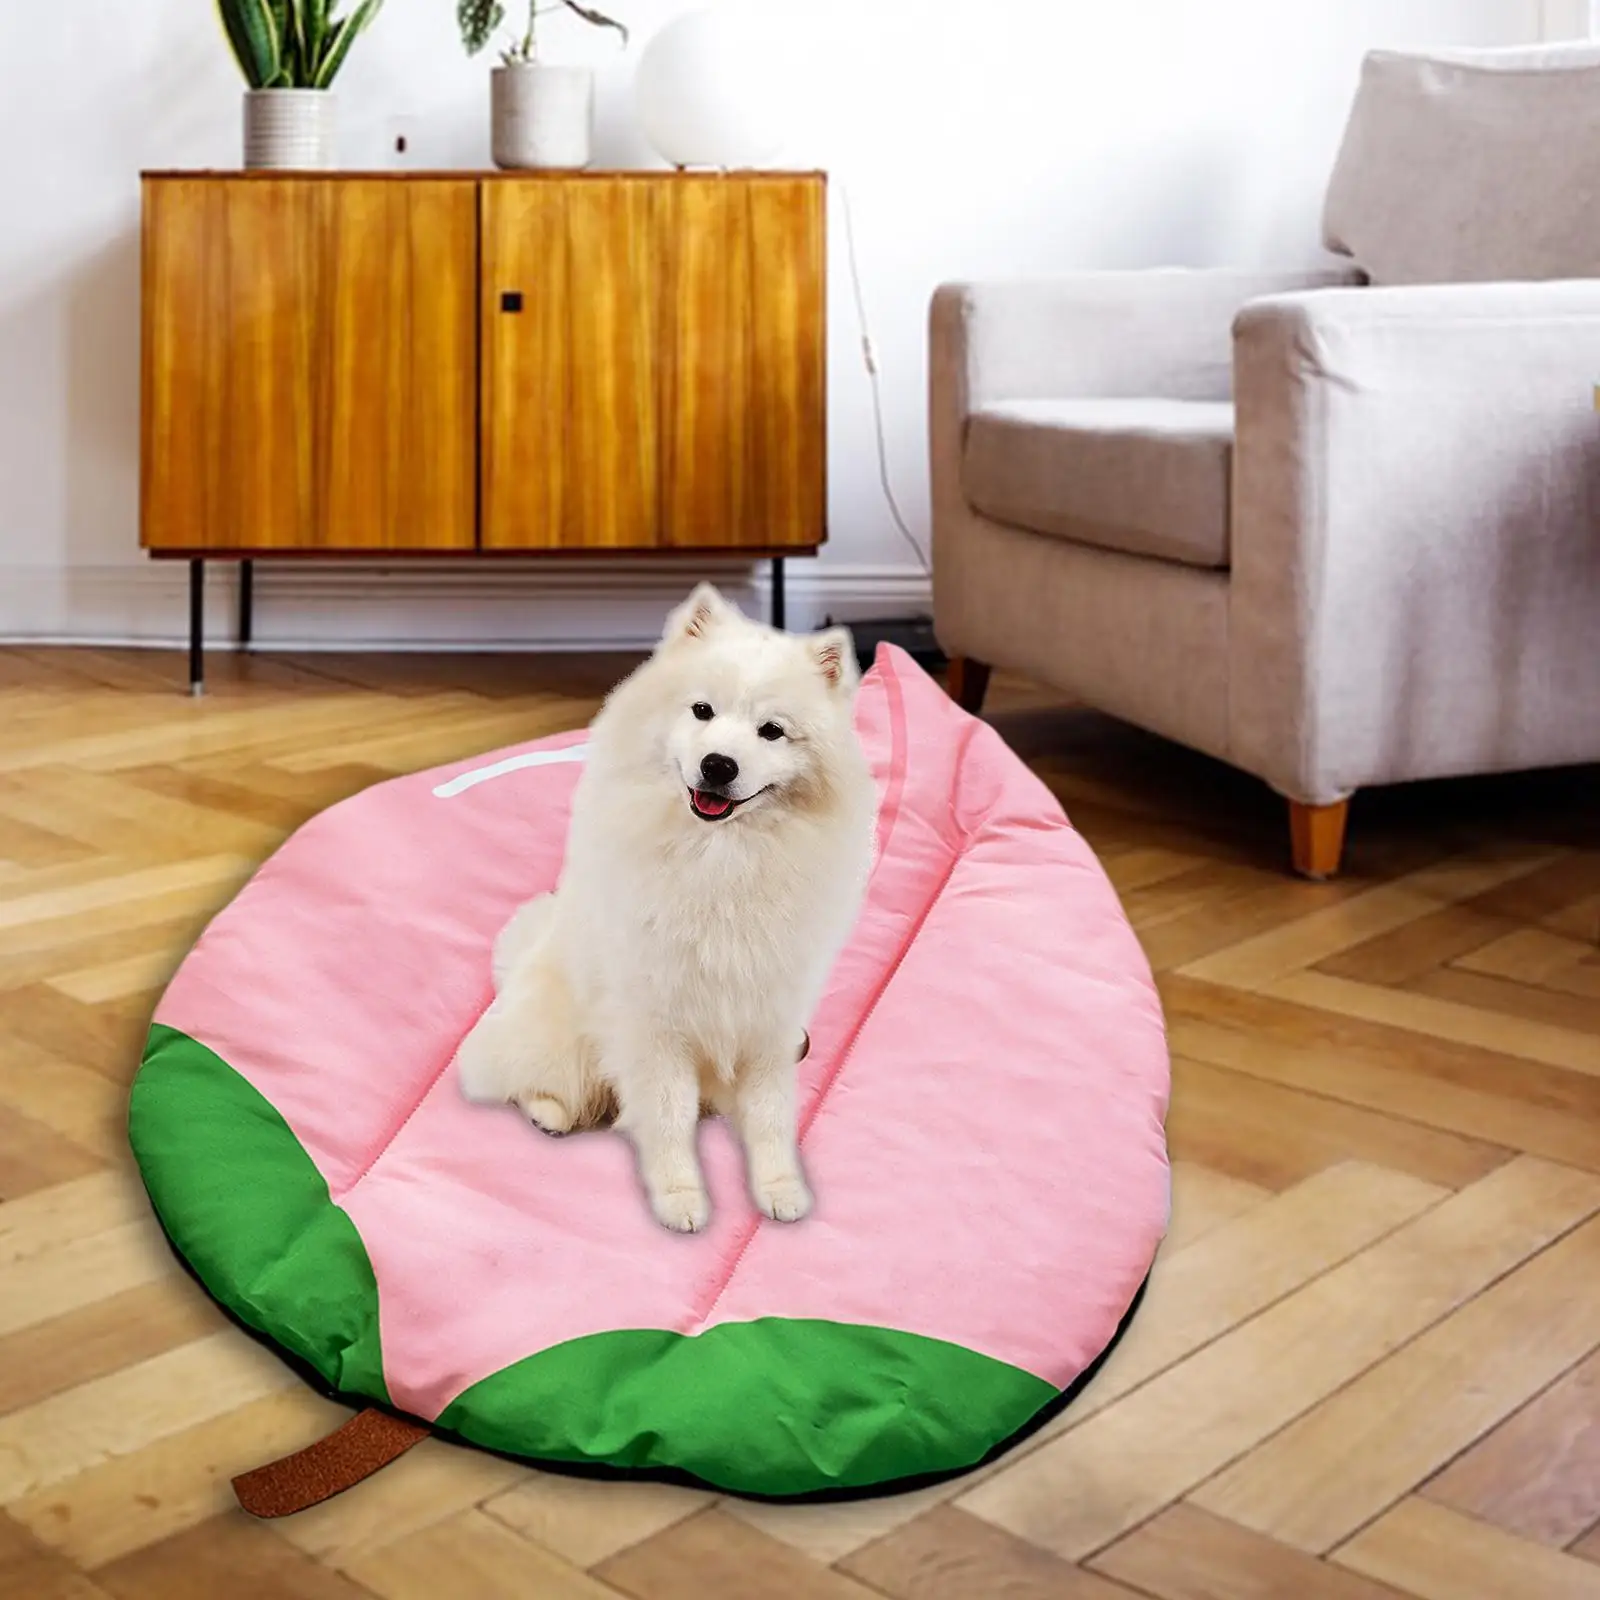 Pet Blanket Cat Bed Mat Dog Sleeping Pad Cushion Indoor Crate Pad Bedding Creative Winter Nest for Kitten Small Dogs Home Decor